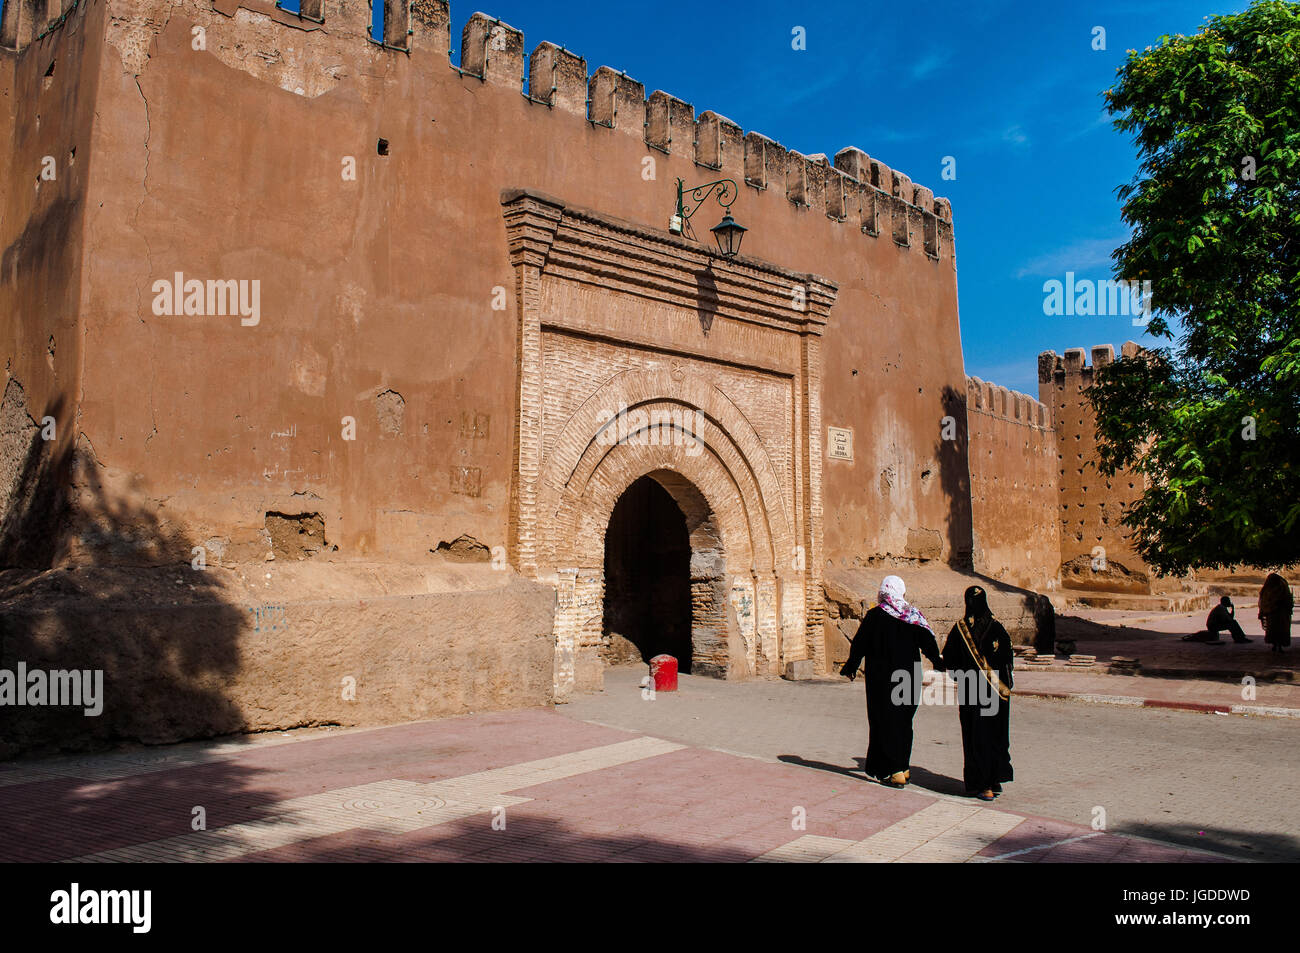 Africa, Morocco, Taroudannt, Veiled Muslim woman walking through arch in old city wall. Stock Photo